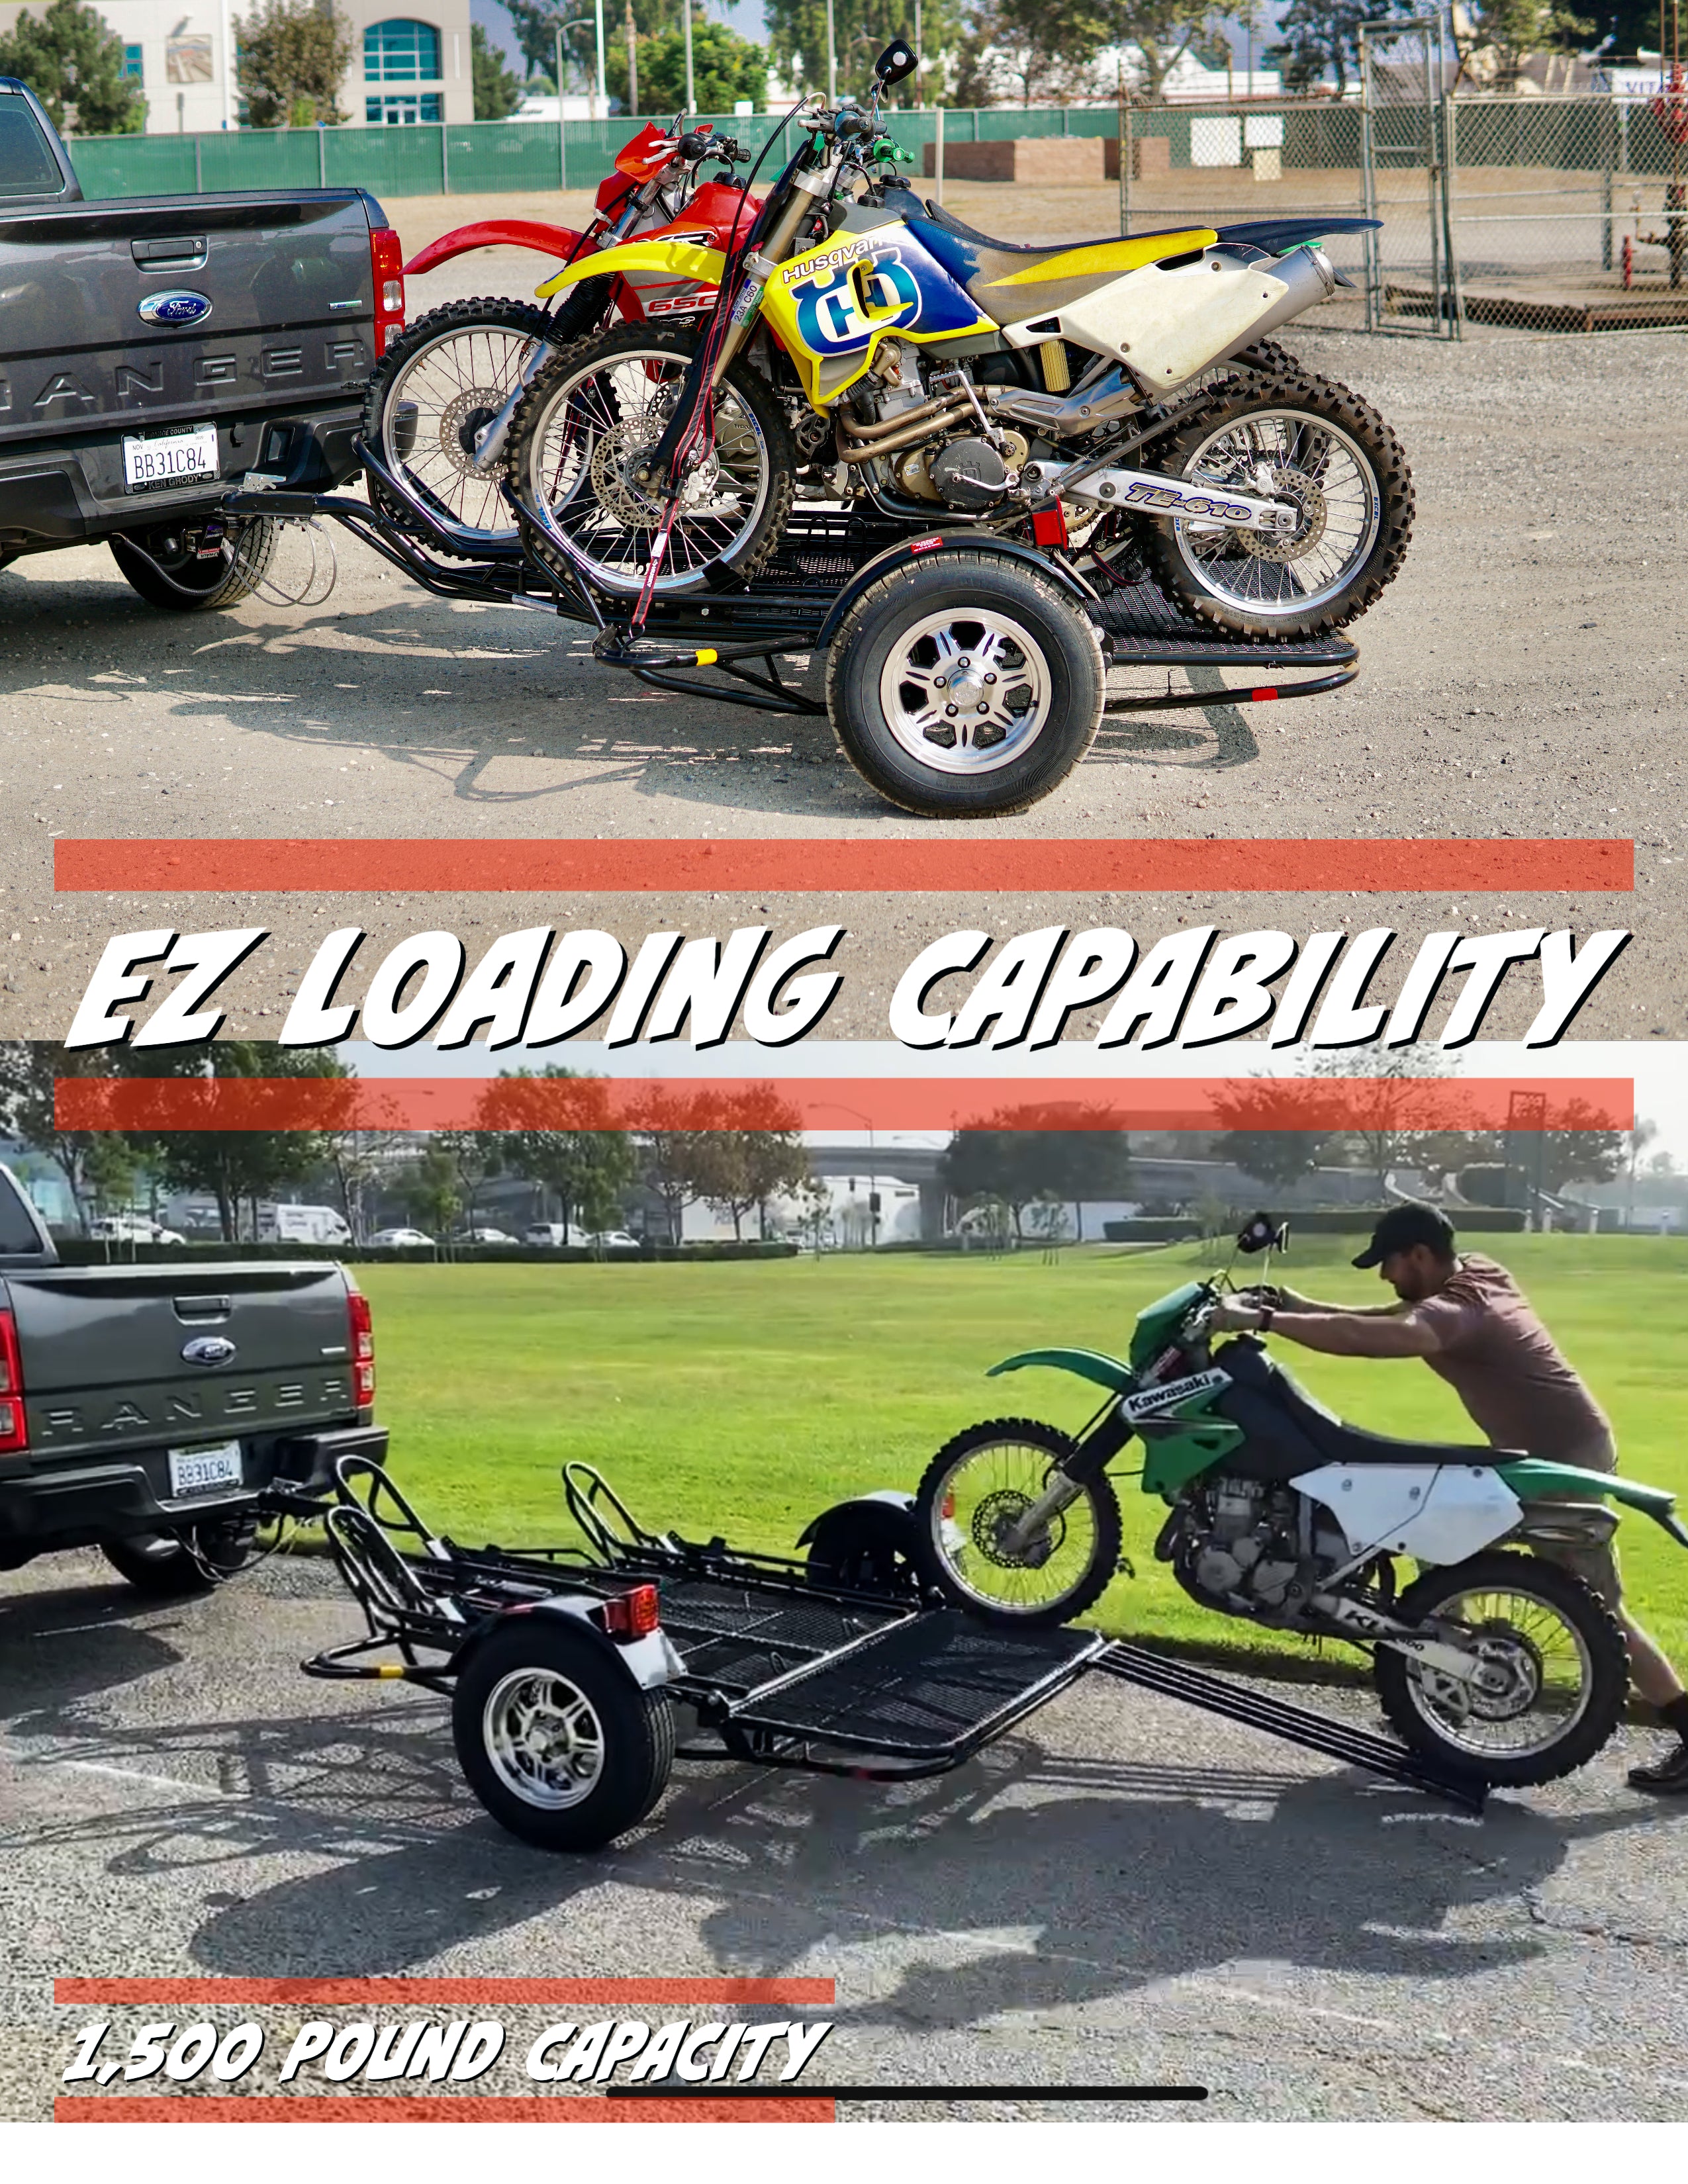 Folding Stand up motorcycle trailer from kendon motorcycle trailers